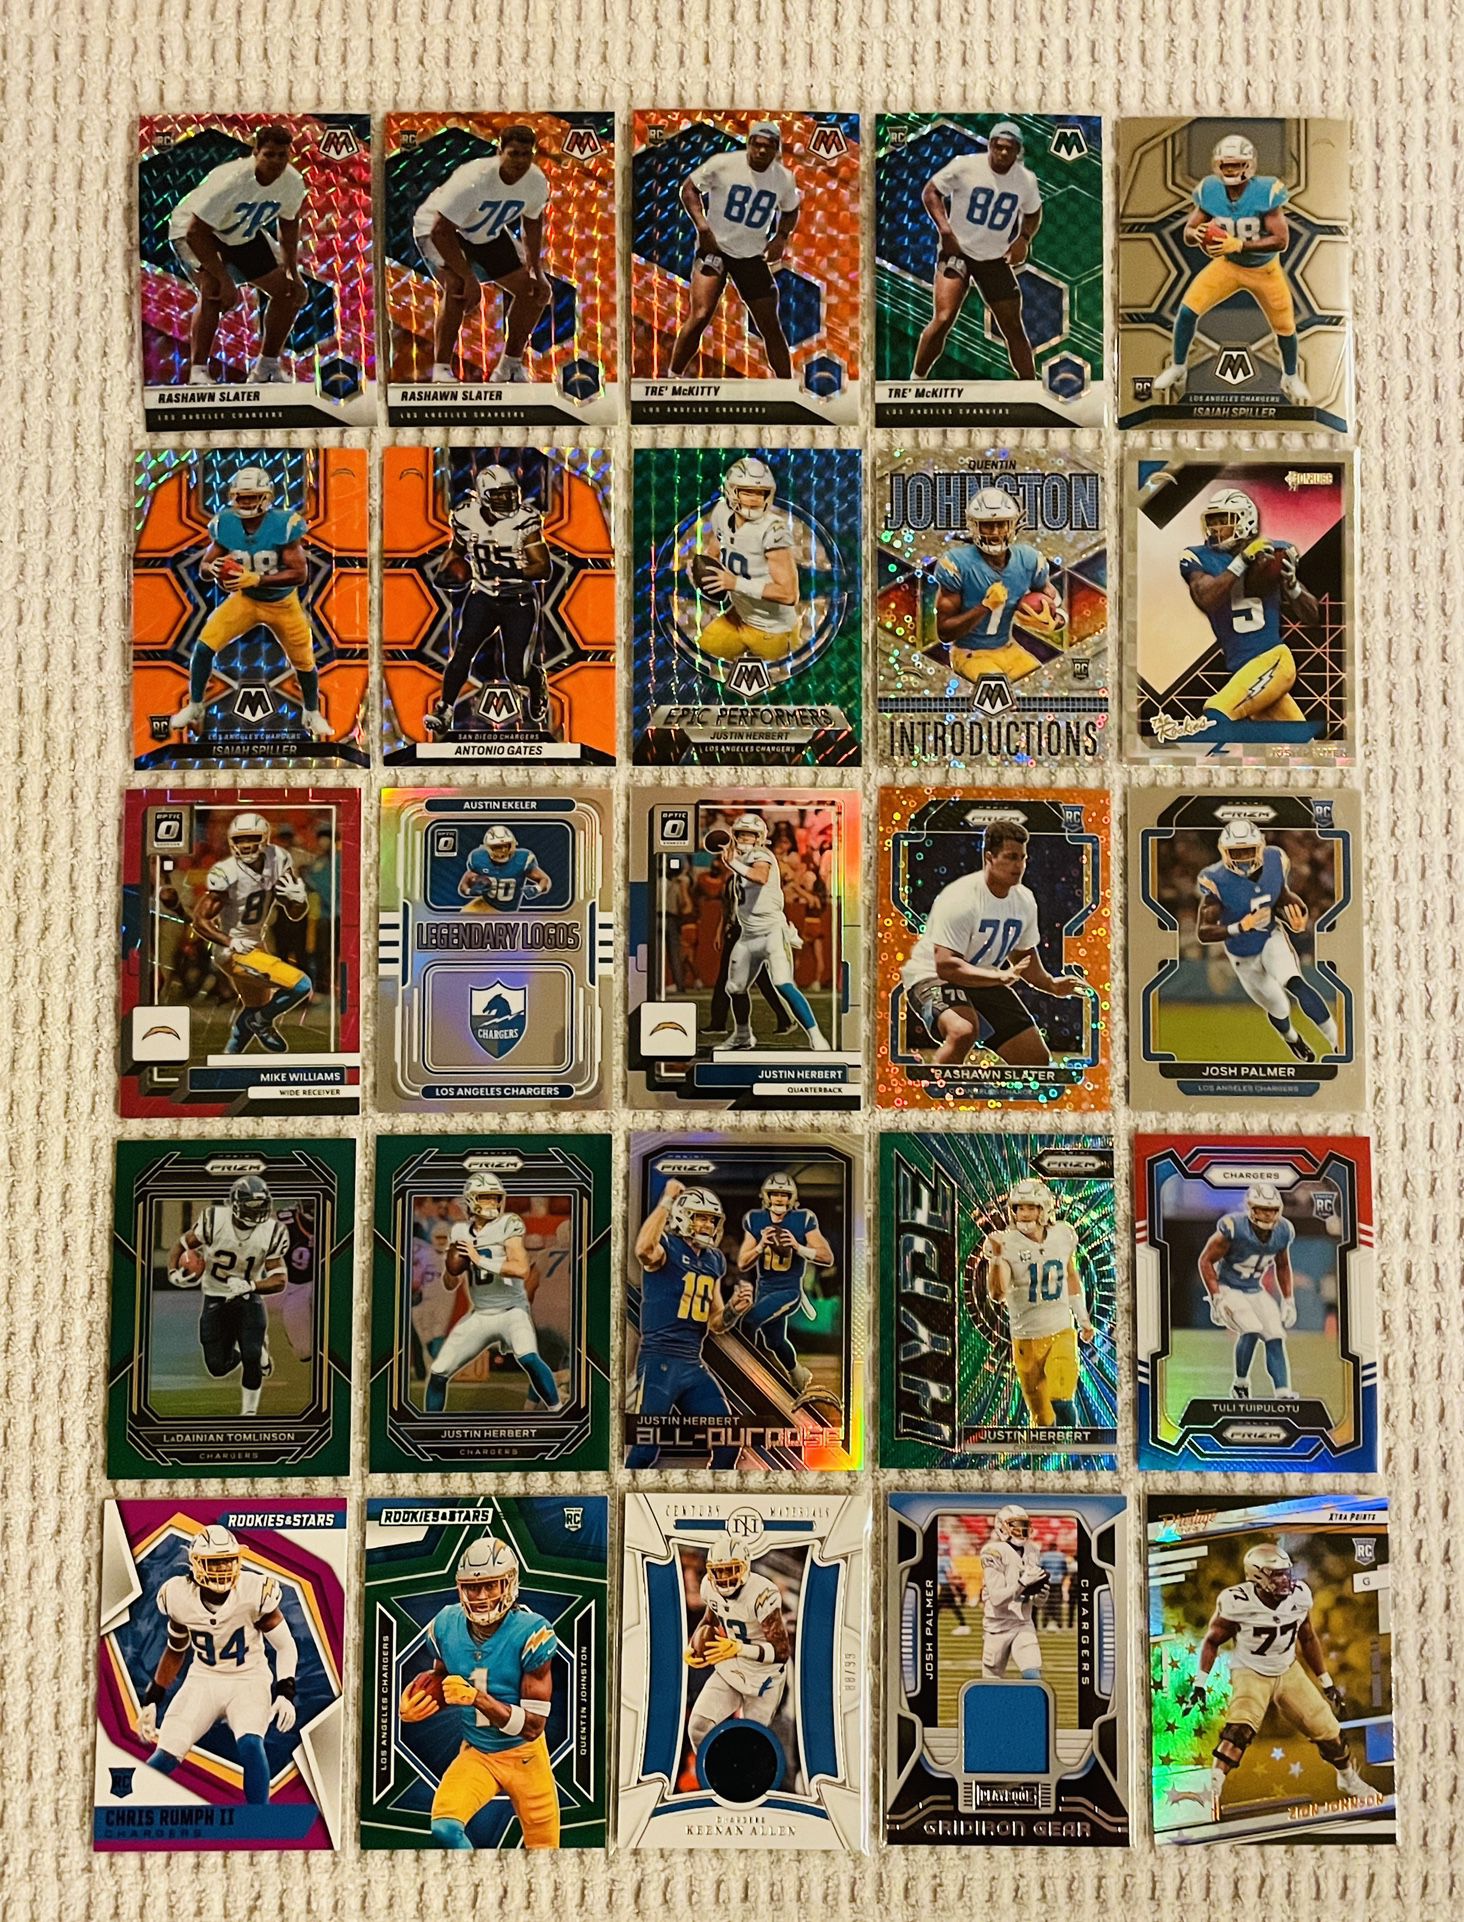 Los Angeles Chargers 25 Card Football Lot! Rookies, Prizms, Parallels, Memorabilia, Short Prints, Variations & More!